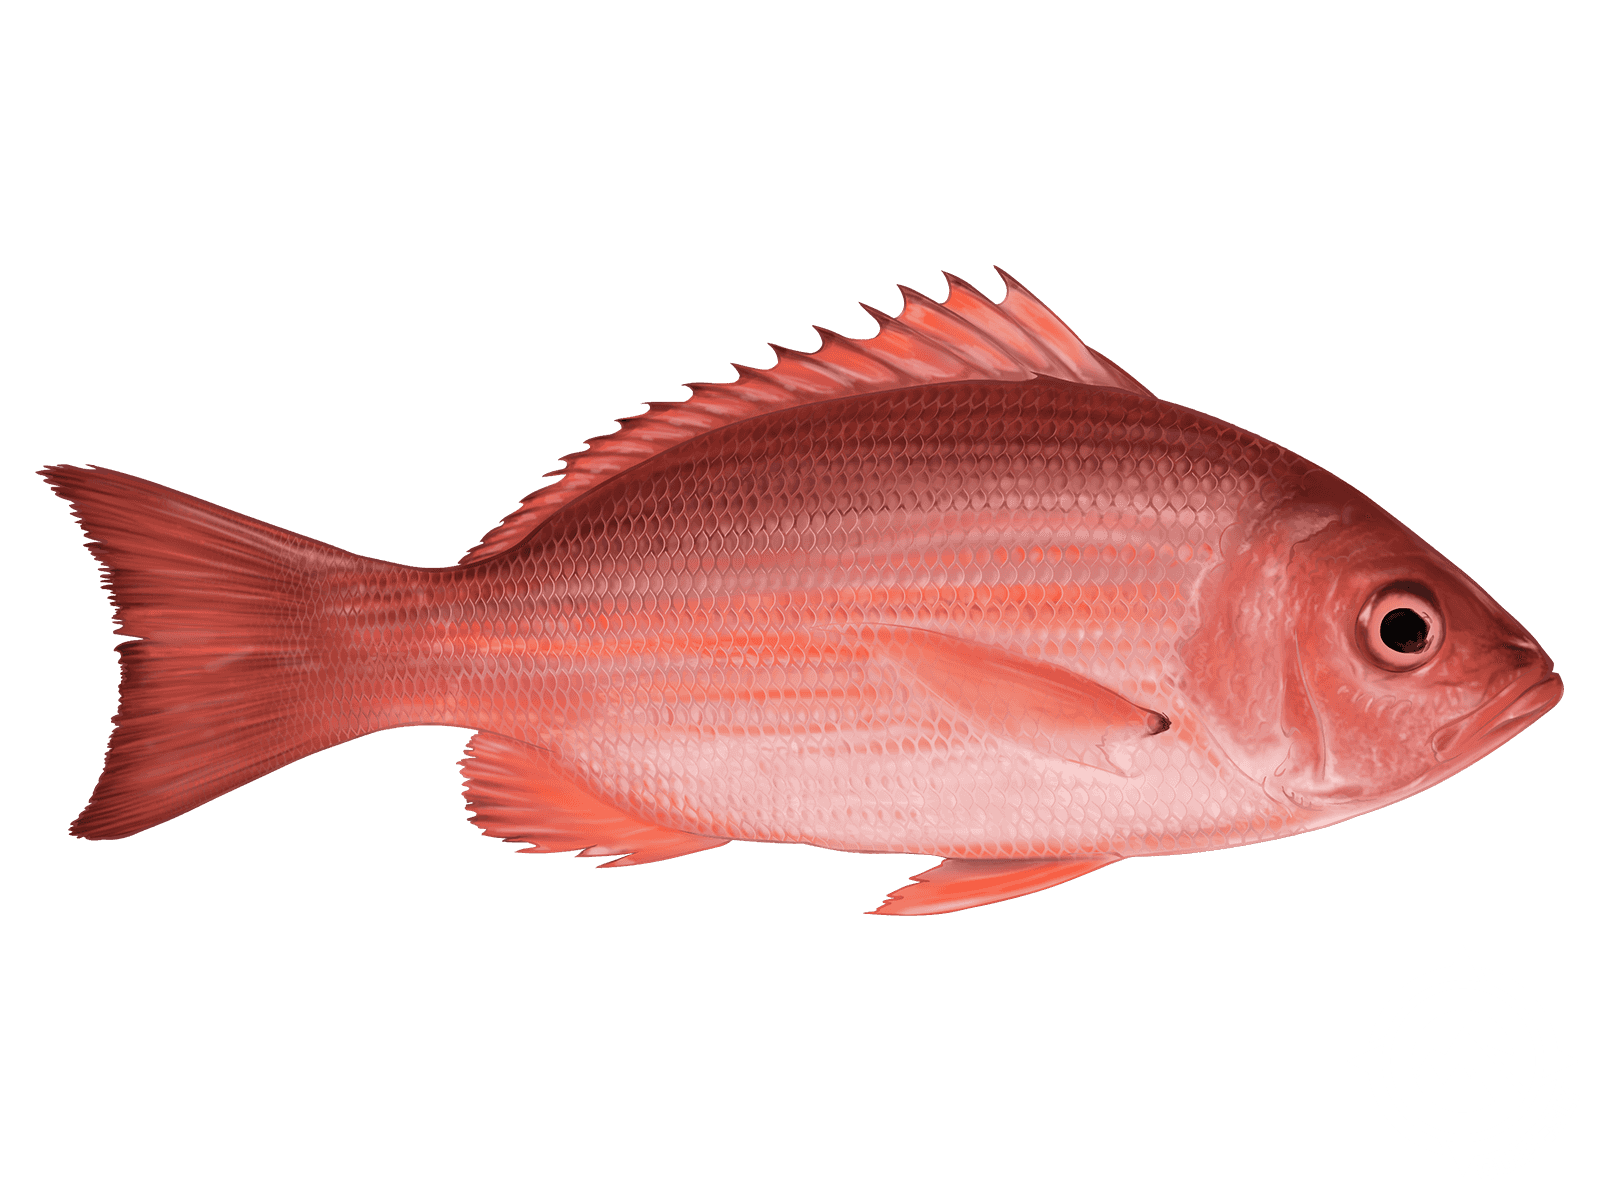 Snapper status and information